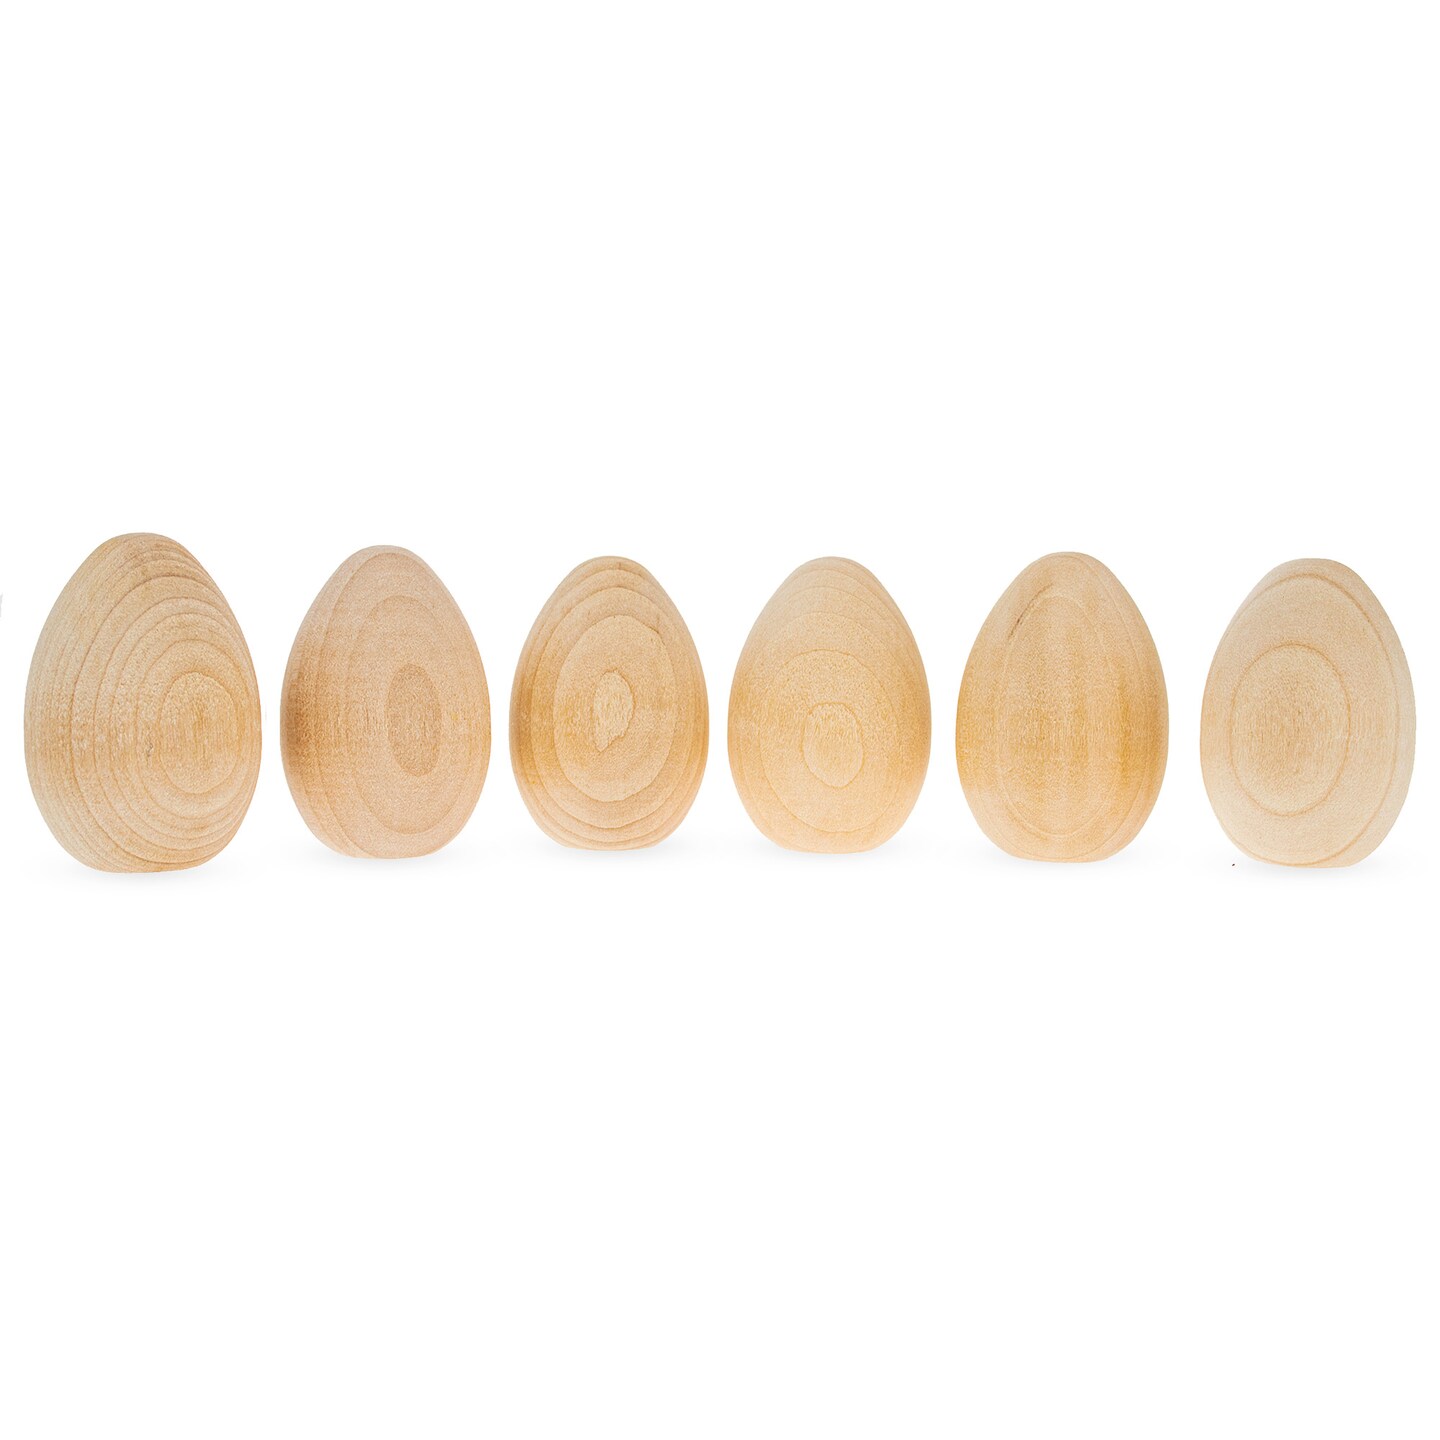 6 Miniature Unfinished Blank Wooden Eggs 2 Inches